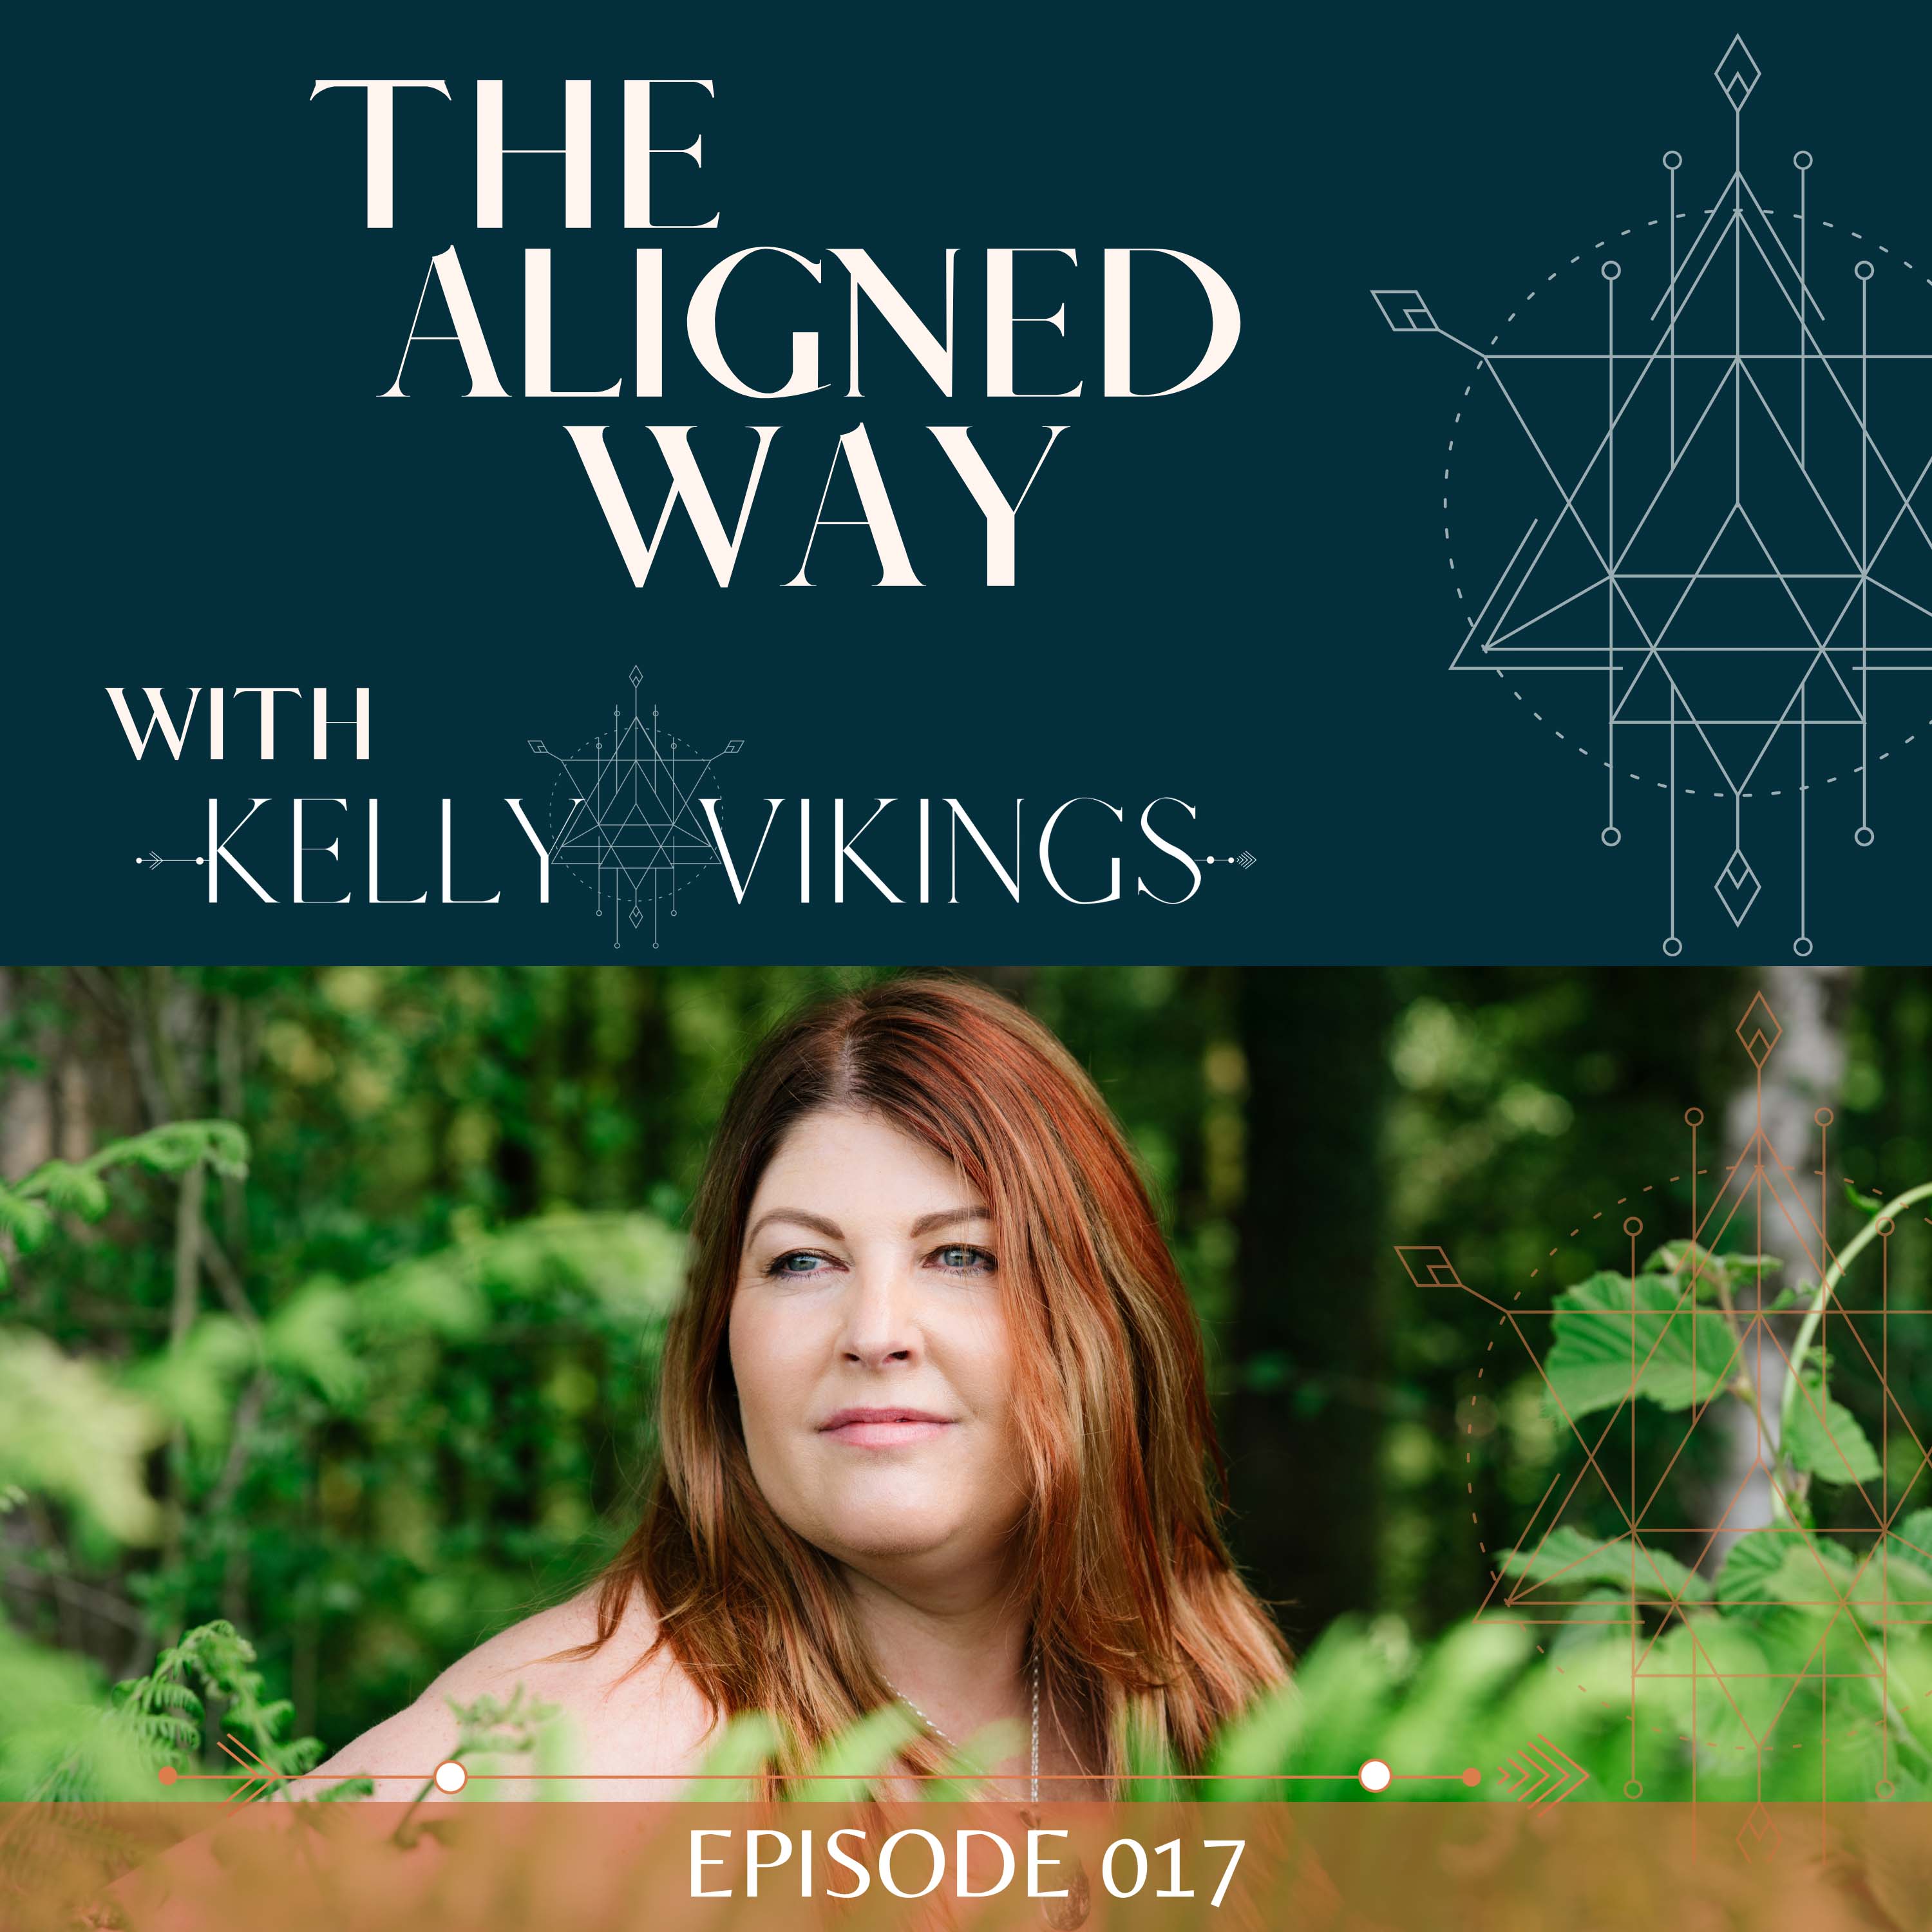 Artwork for podcast The Aligned Way